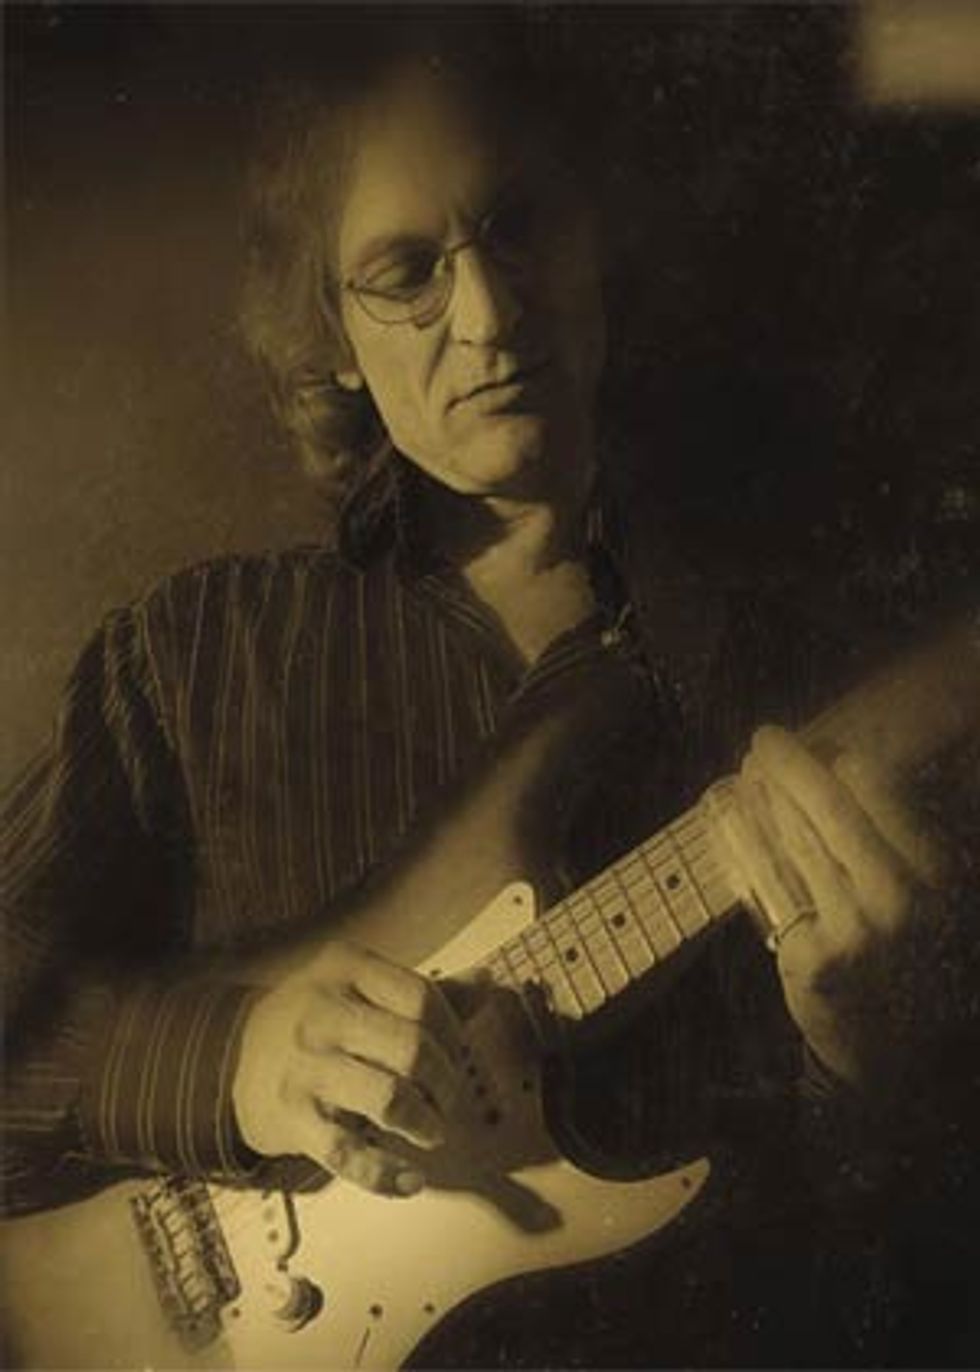 Playing Behind the Slide: An Interview with Sonny Landreth